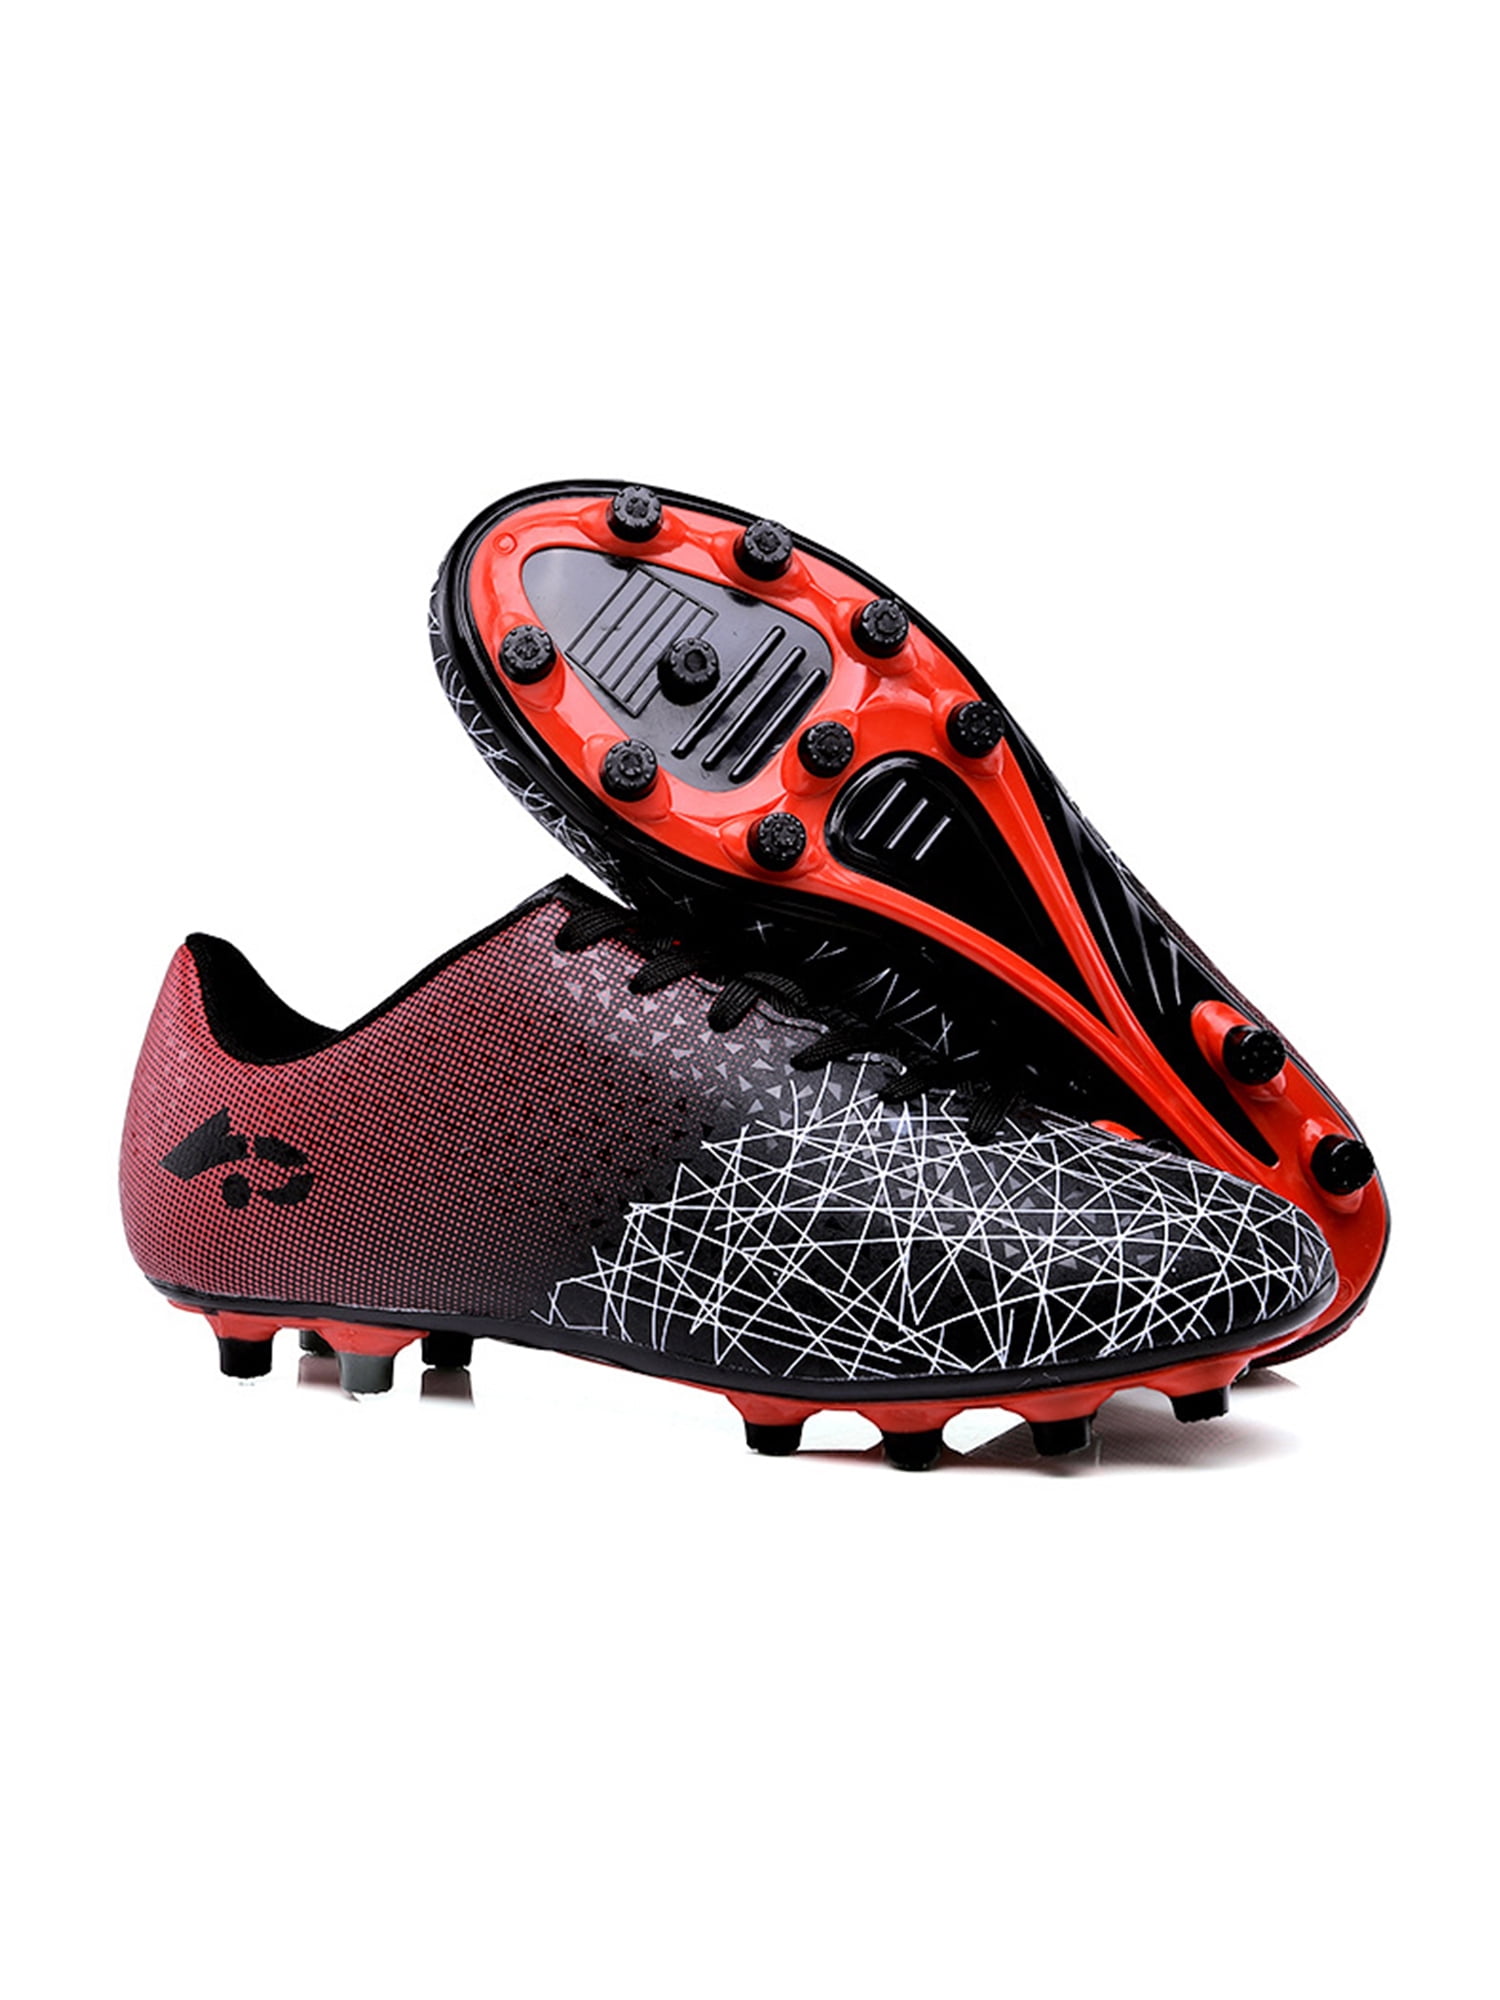 Mens Soccer Cleats Youth Outdoor Football Shoes Firm Ground Soccer Shoes 